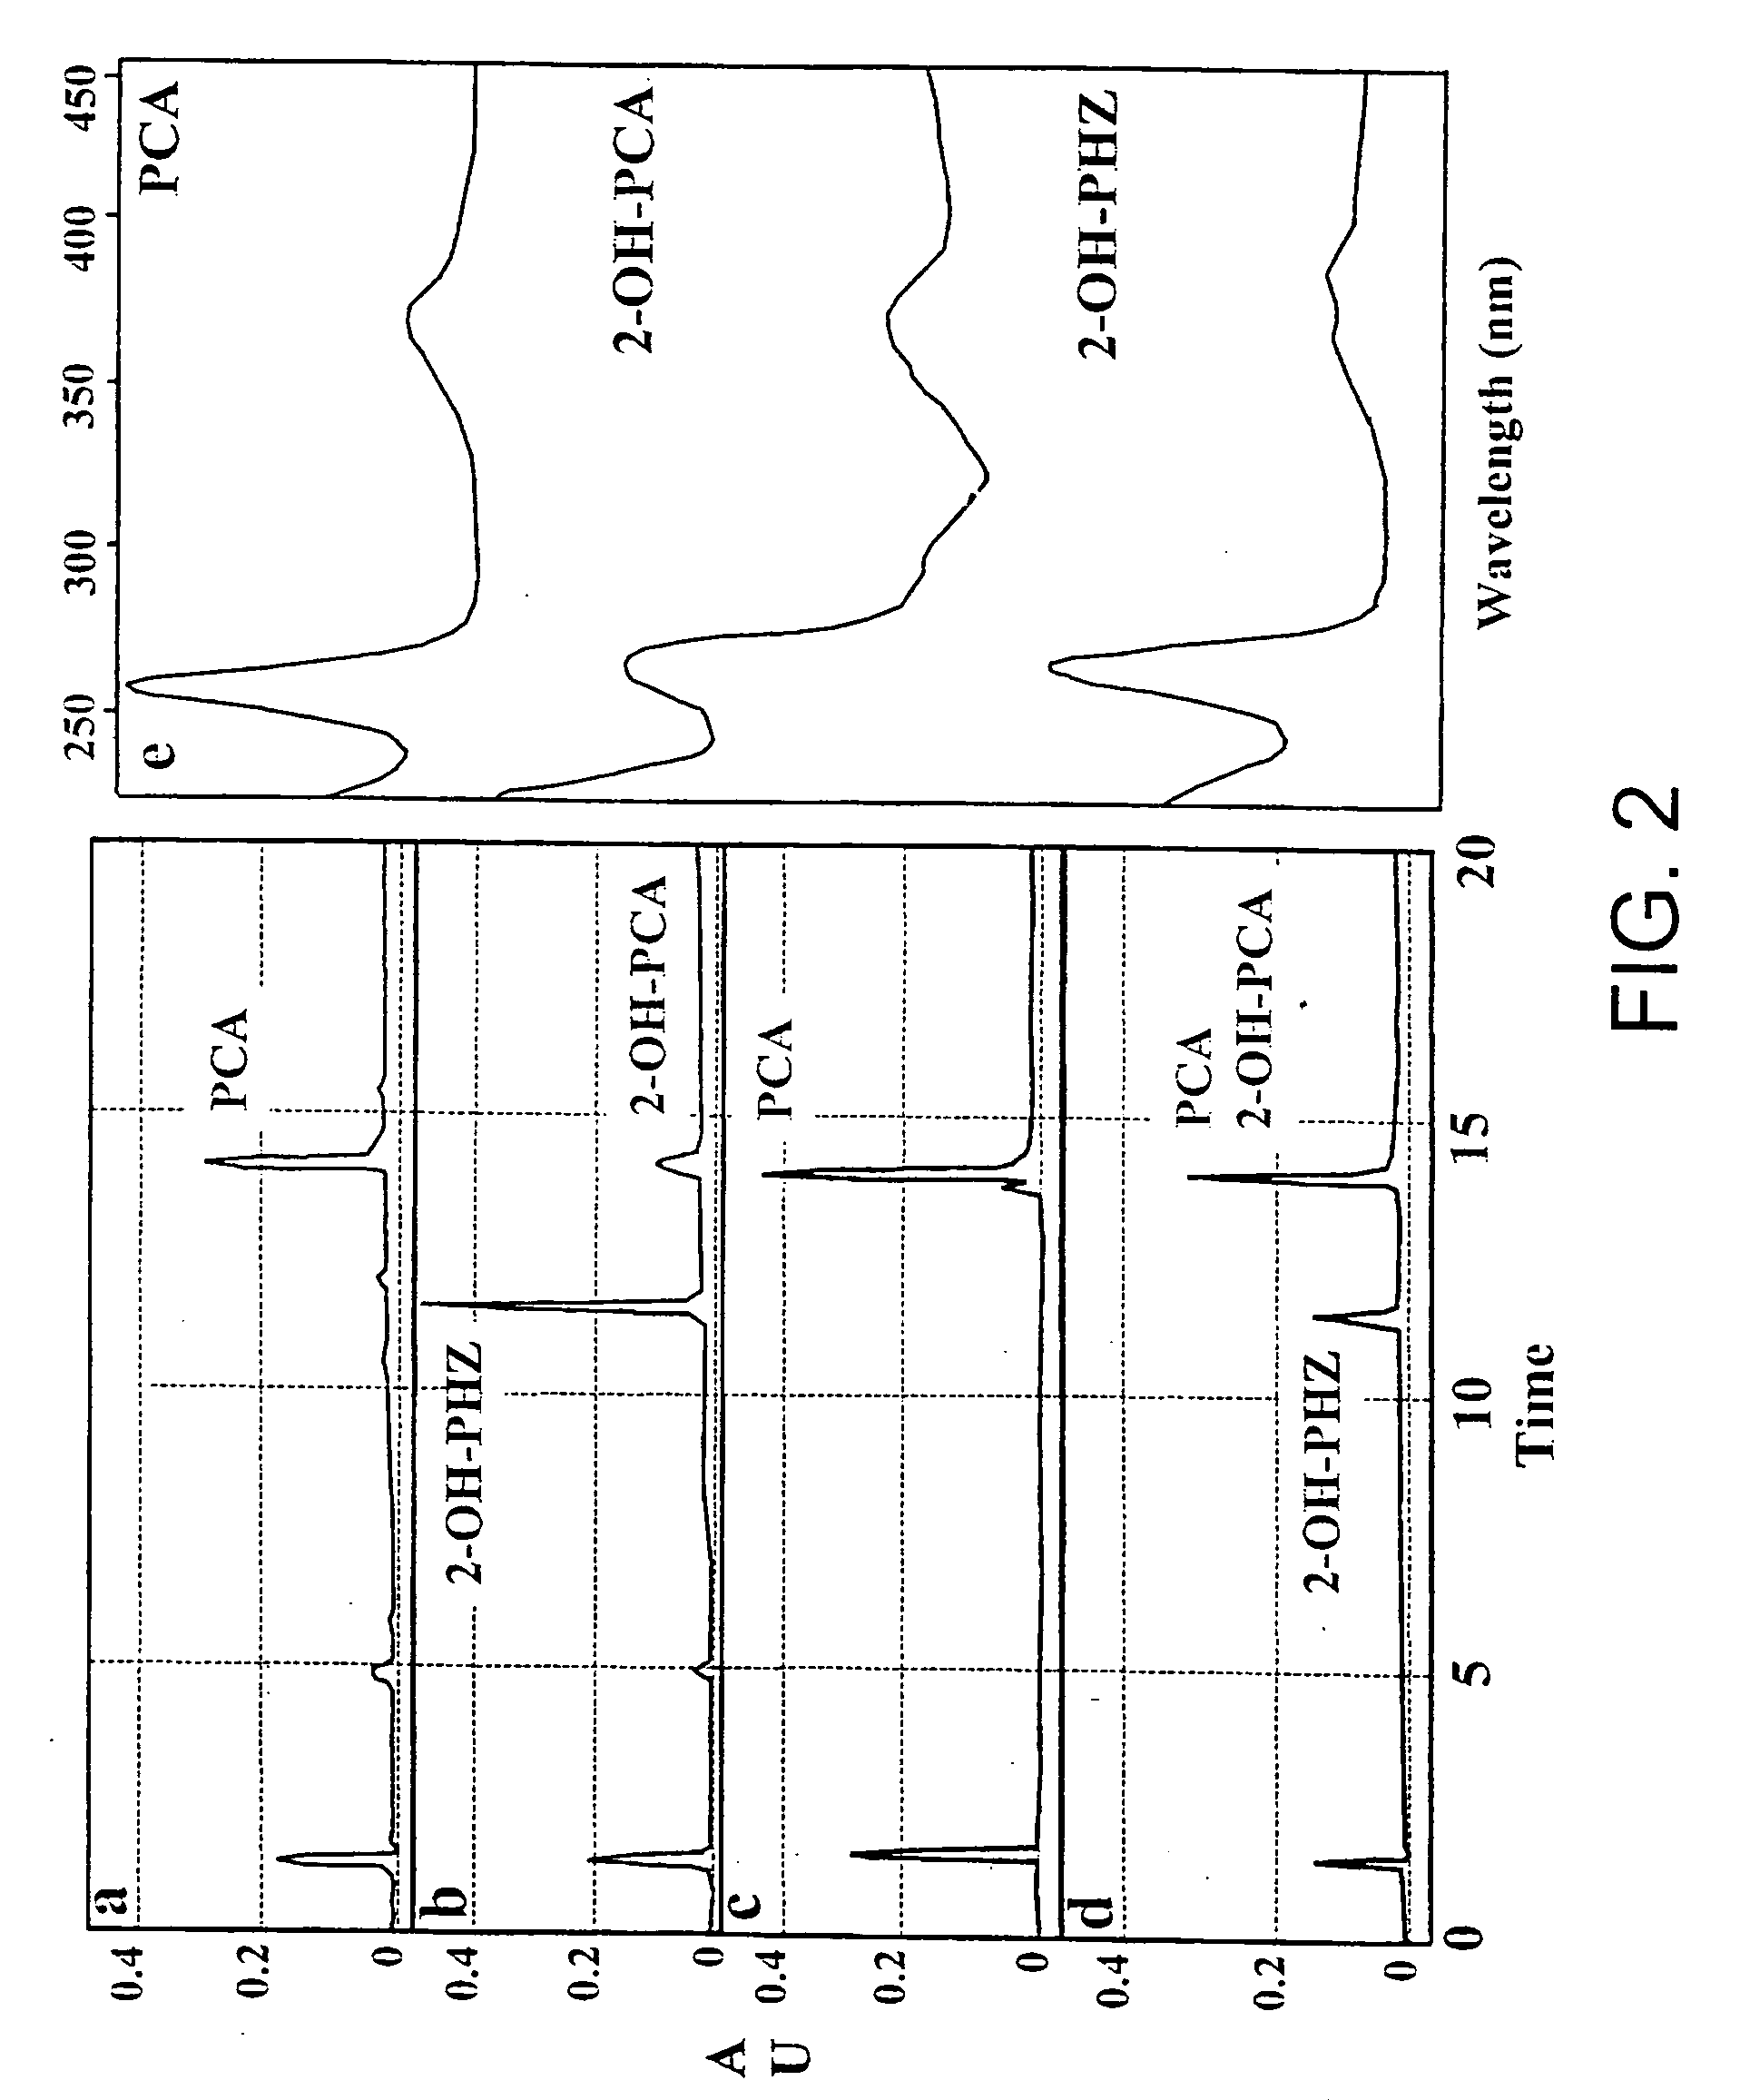 Sequences encoding PhzO and methods